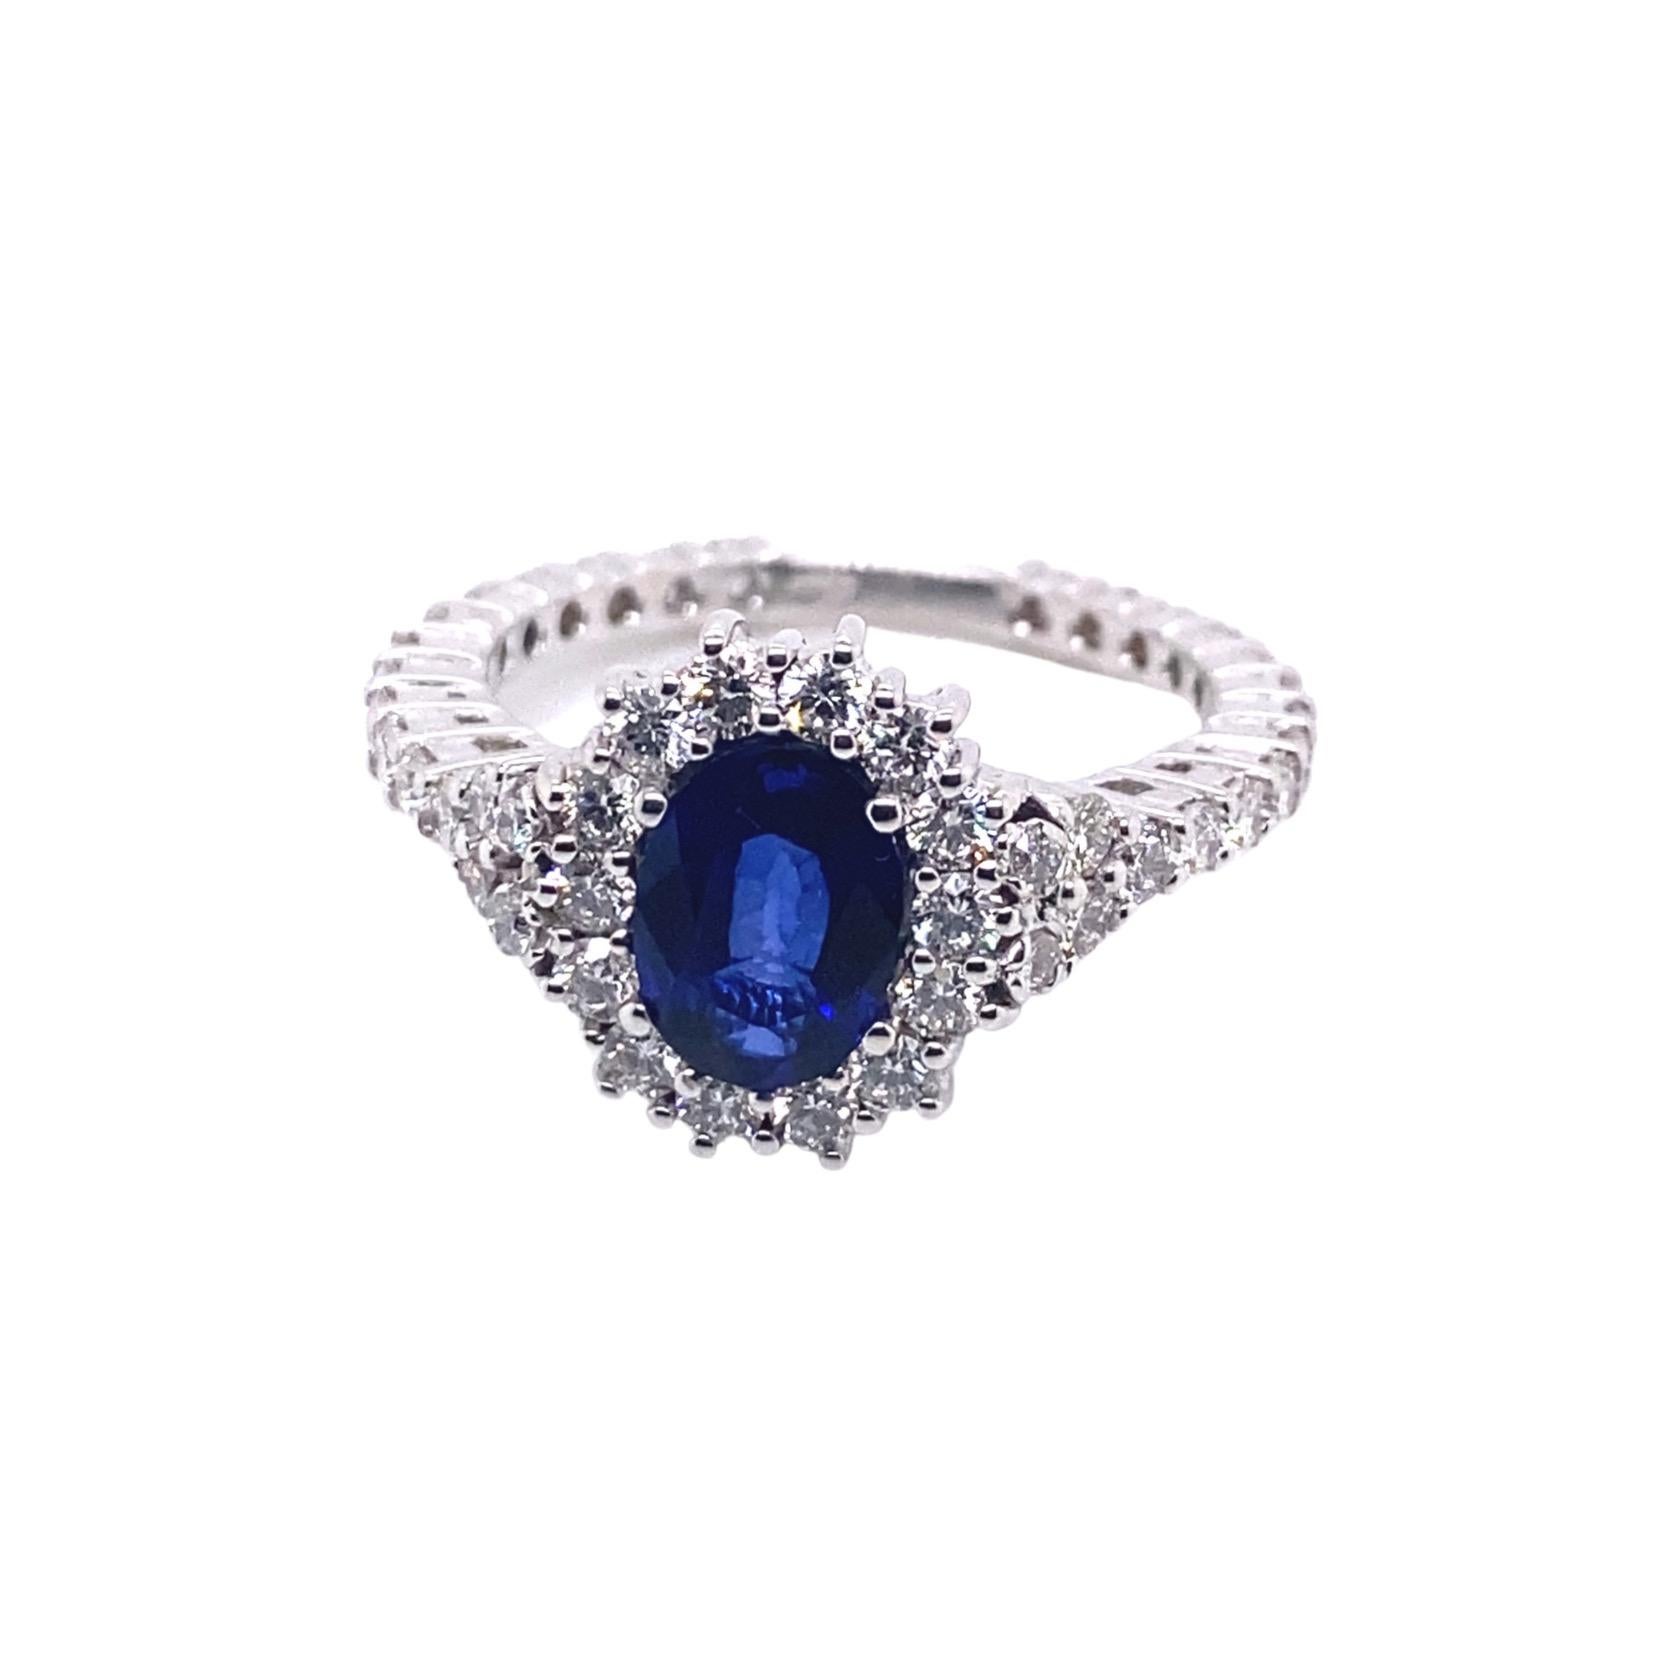 Introducing a breathtaking cocktail ring that epitomizes opulence and sophistication. Handcrafted with exceptional artistry in Palermo, Sicily, by master jewellers, this 18-karat white gold ring showcases a central 1.48-carat blue sapphire with a